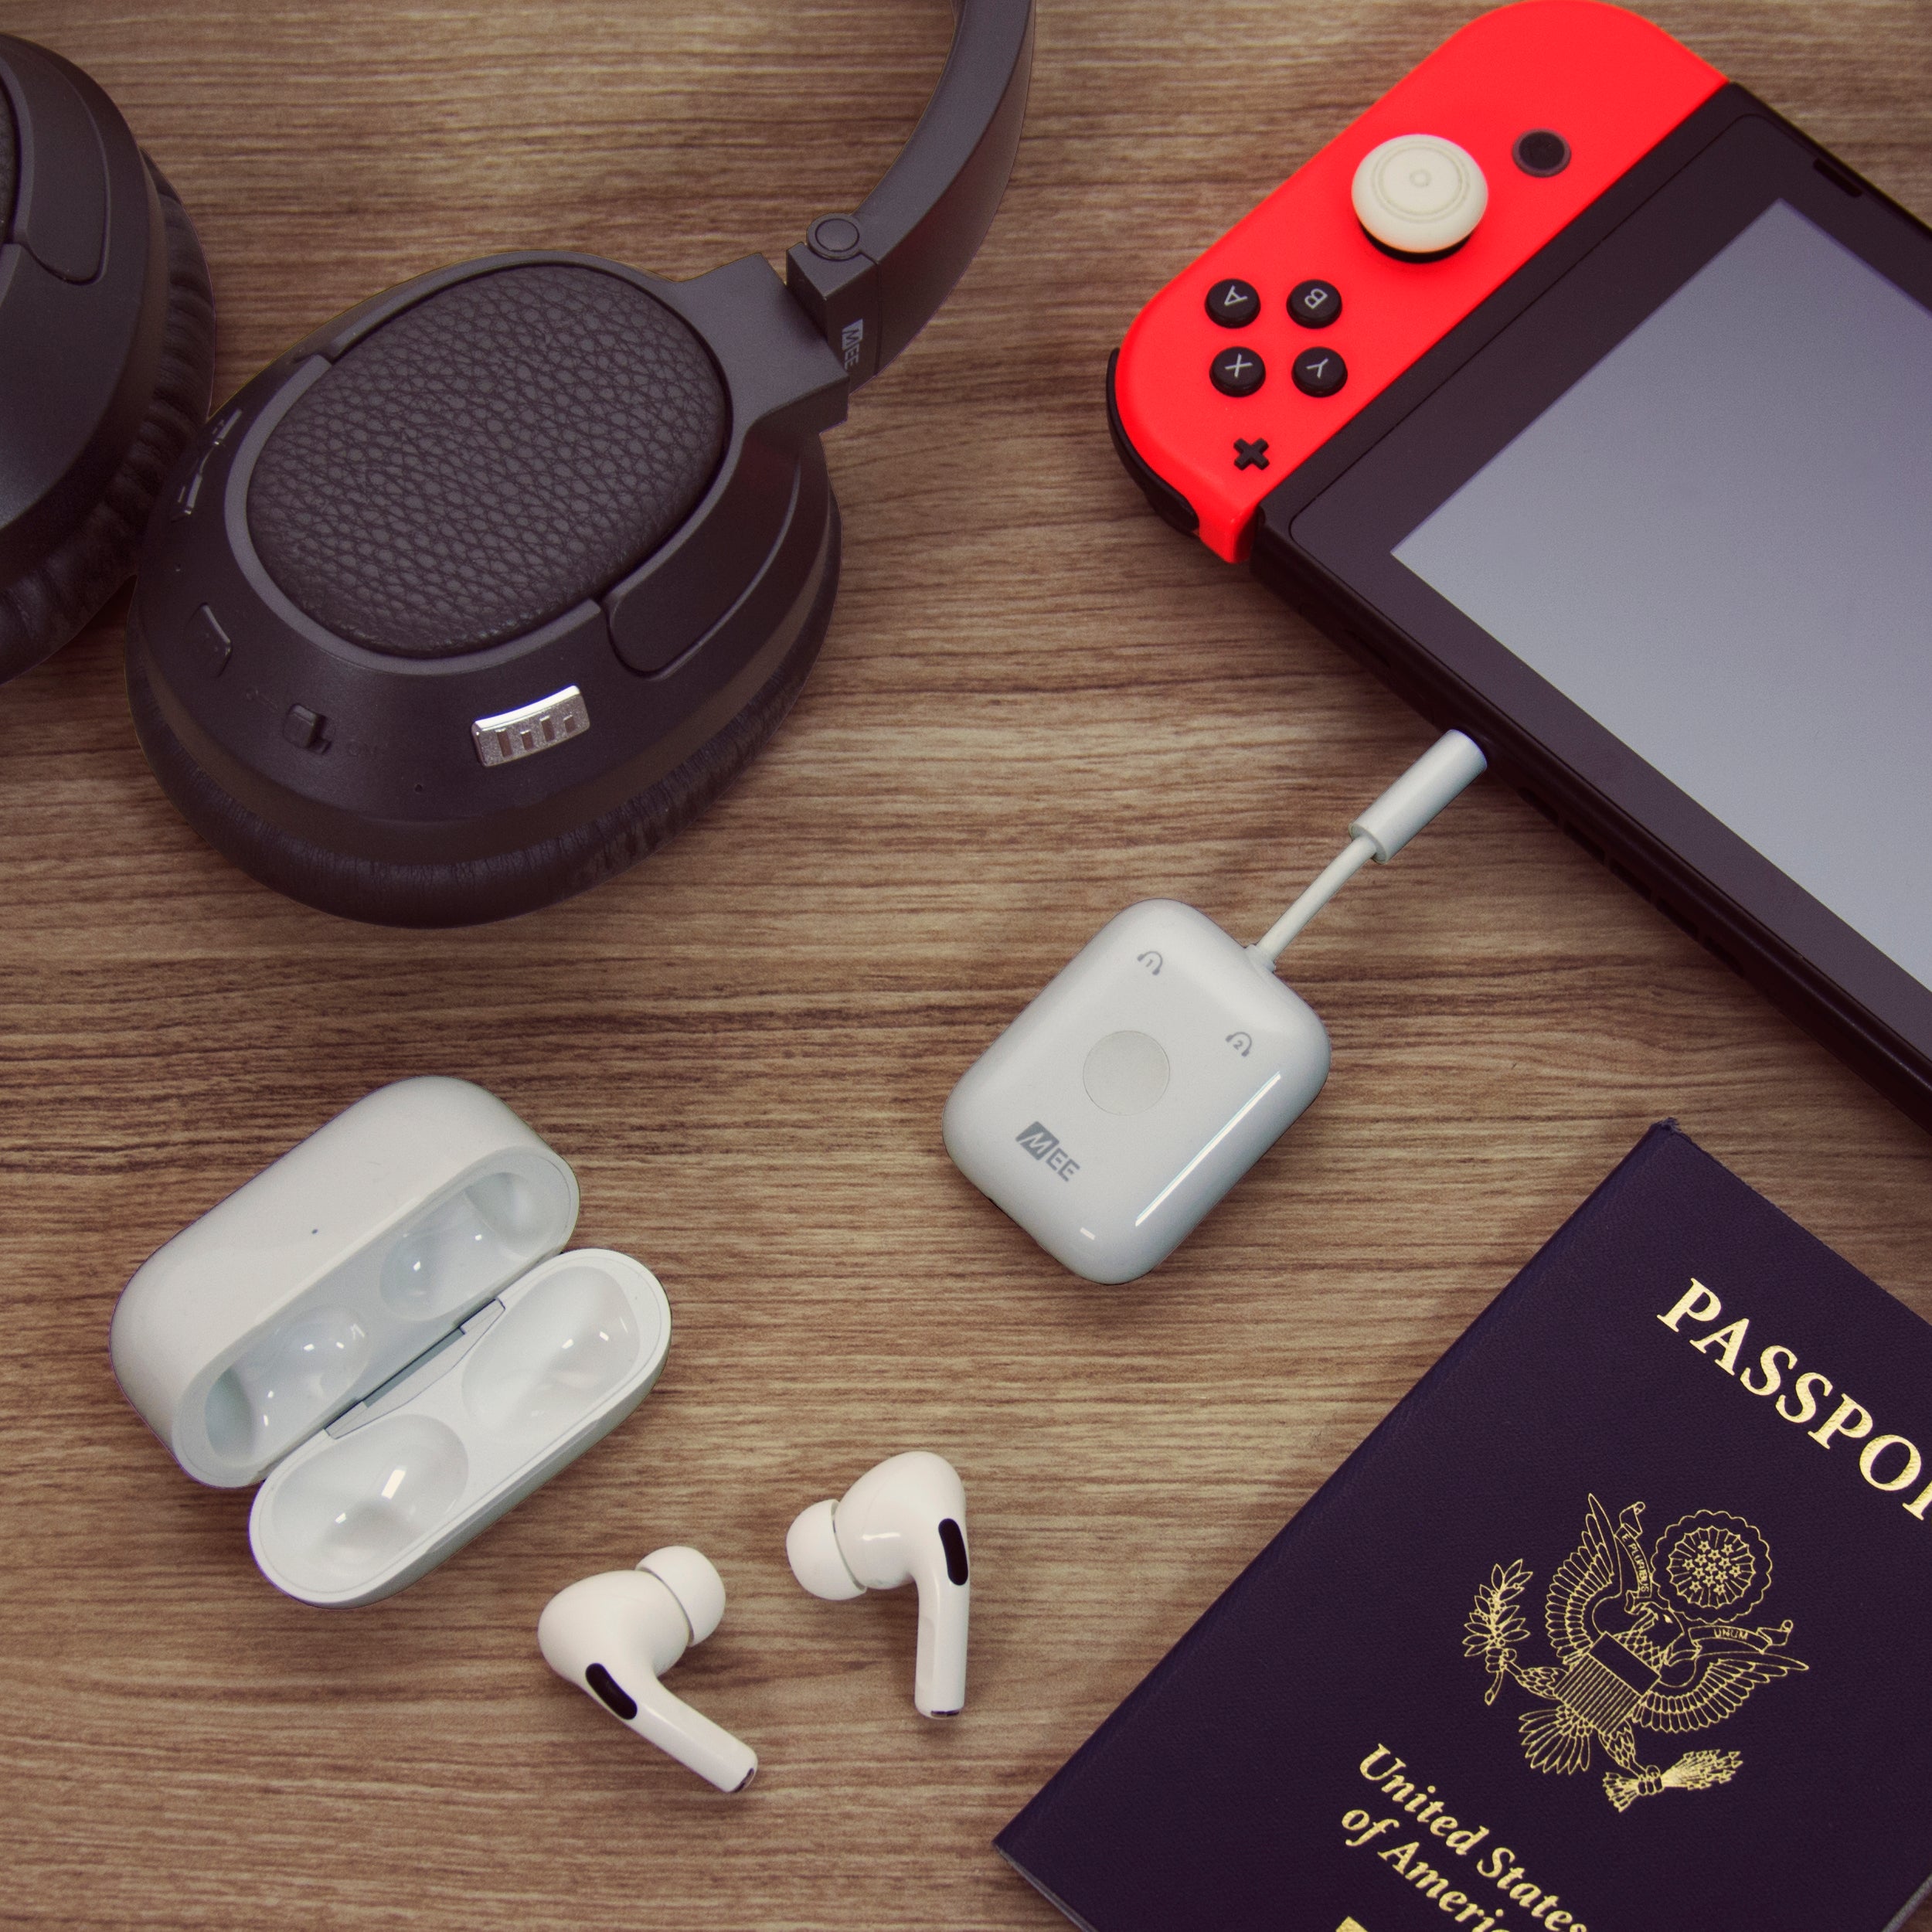 A flat lay photo featuring a passport, headphones, a handheld gaming console, a wireless transmitter, and earbuds on a wooden surface.